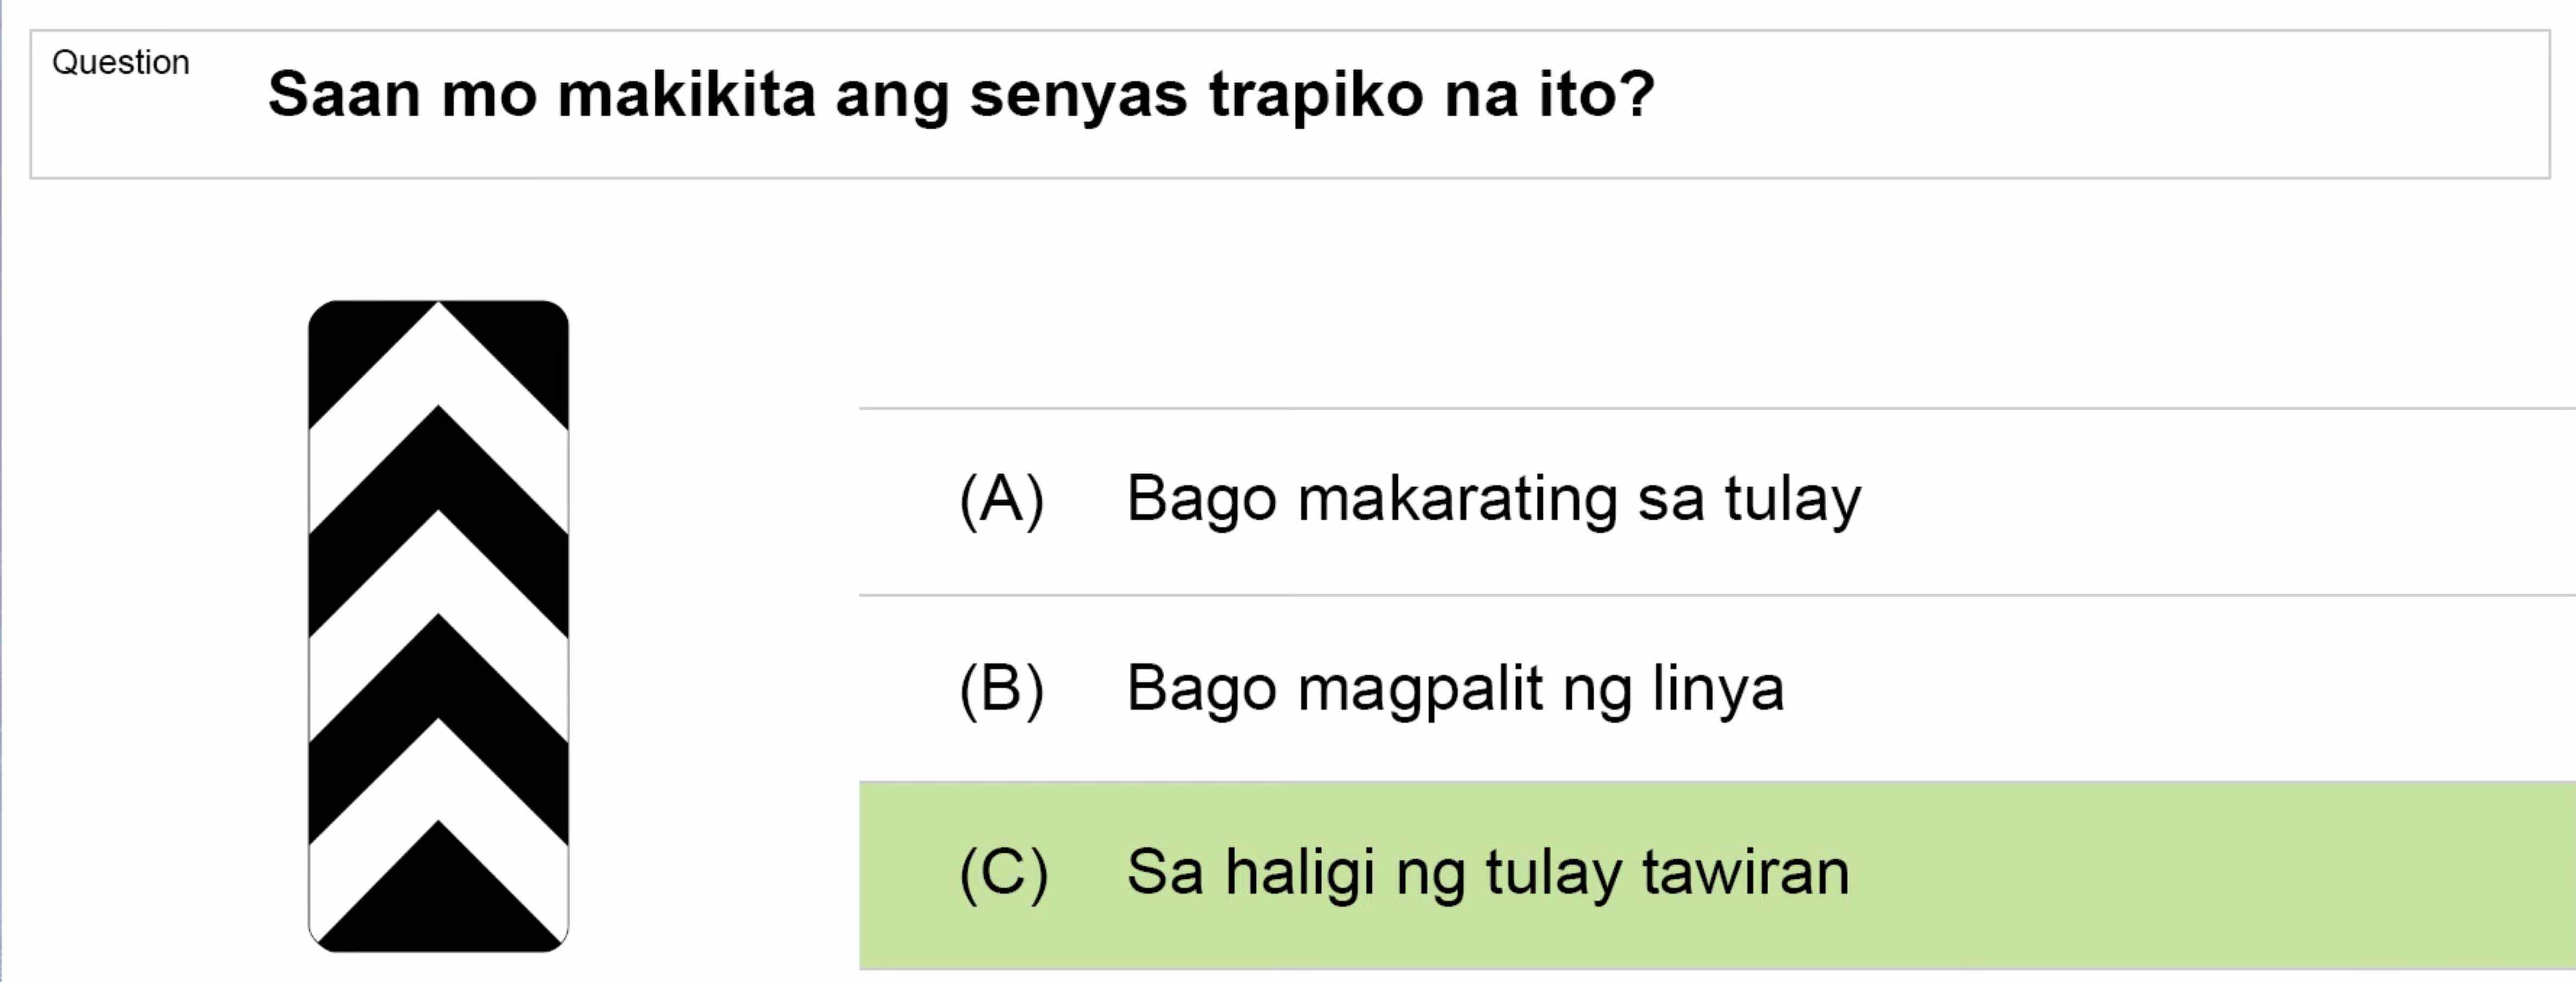 LTO Tagalog non professional exam reviewer light vehicle 1 (1)